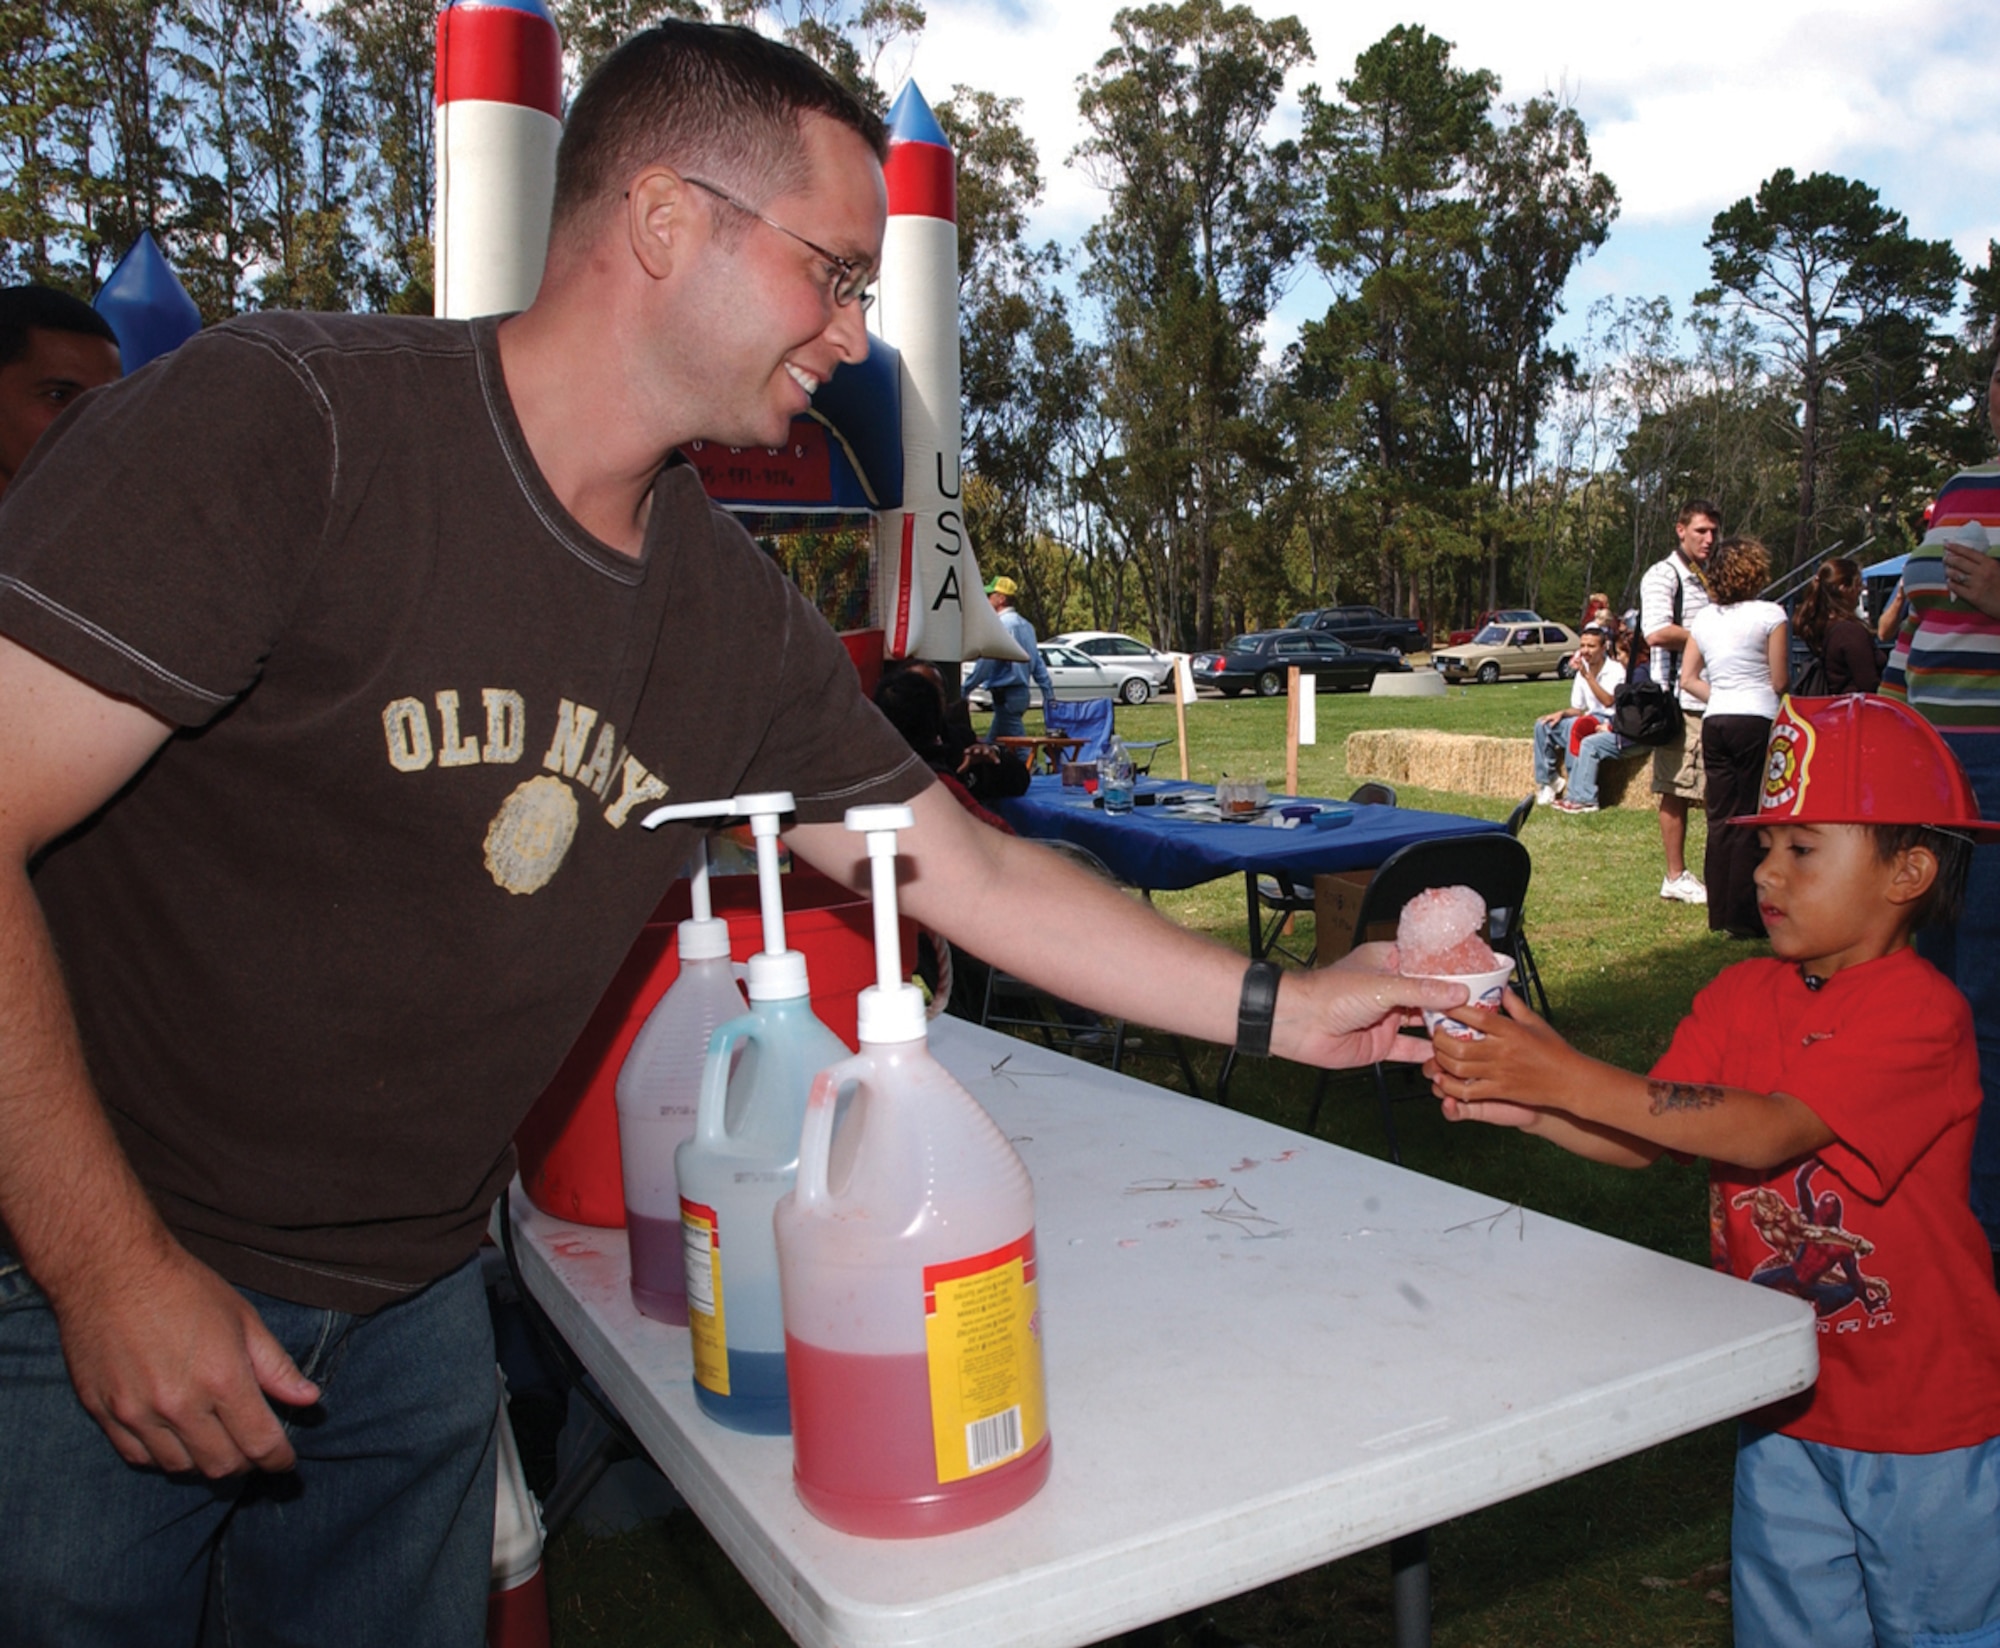 VANDENBERG AIR FORCE BASECanadian Air Force Sgt. Marc Corriveau, 533rd
Training Squadron, treats Jacob Cronin, 5, to a snow
cone during the 17th annual Texas Blowout Barbecue
held in Cocheo Park Sept. 9, 2005.(U.S. Air Force photo by Staff Sgt. Orly Tyrell) 